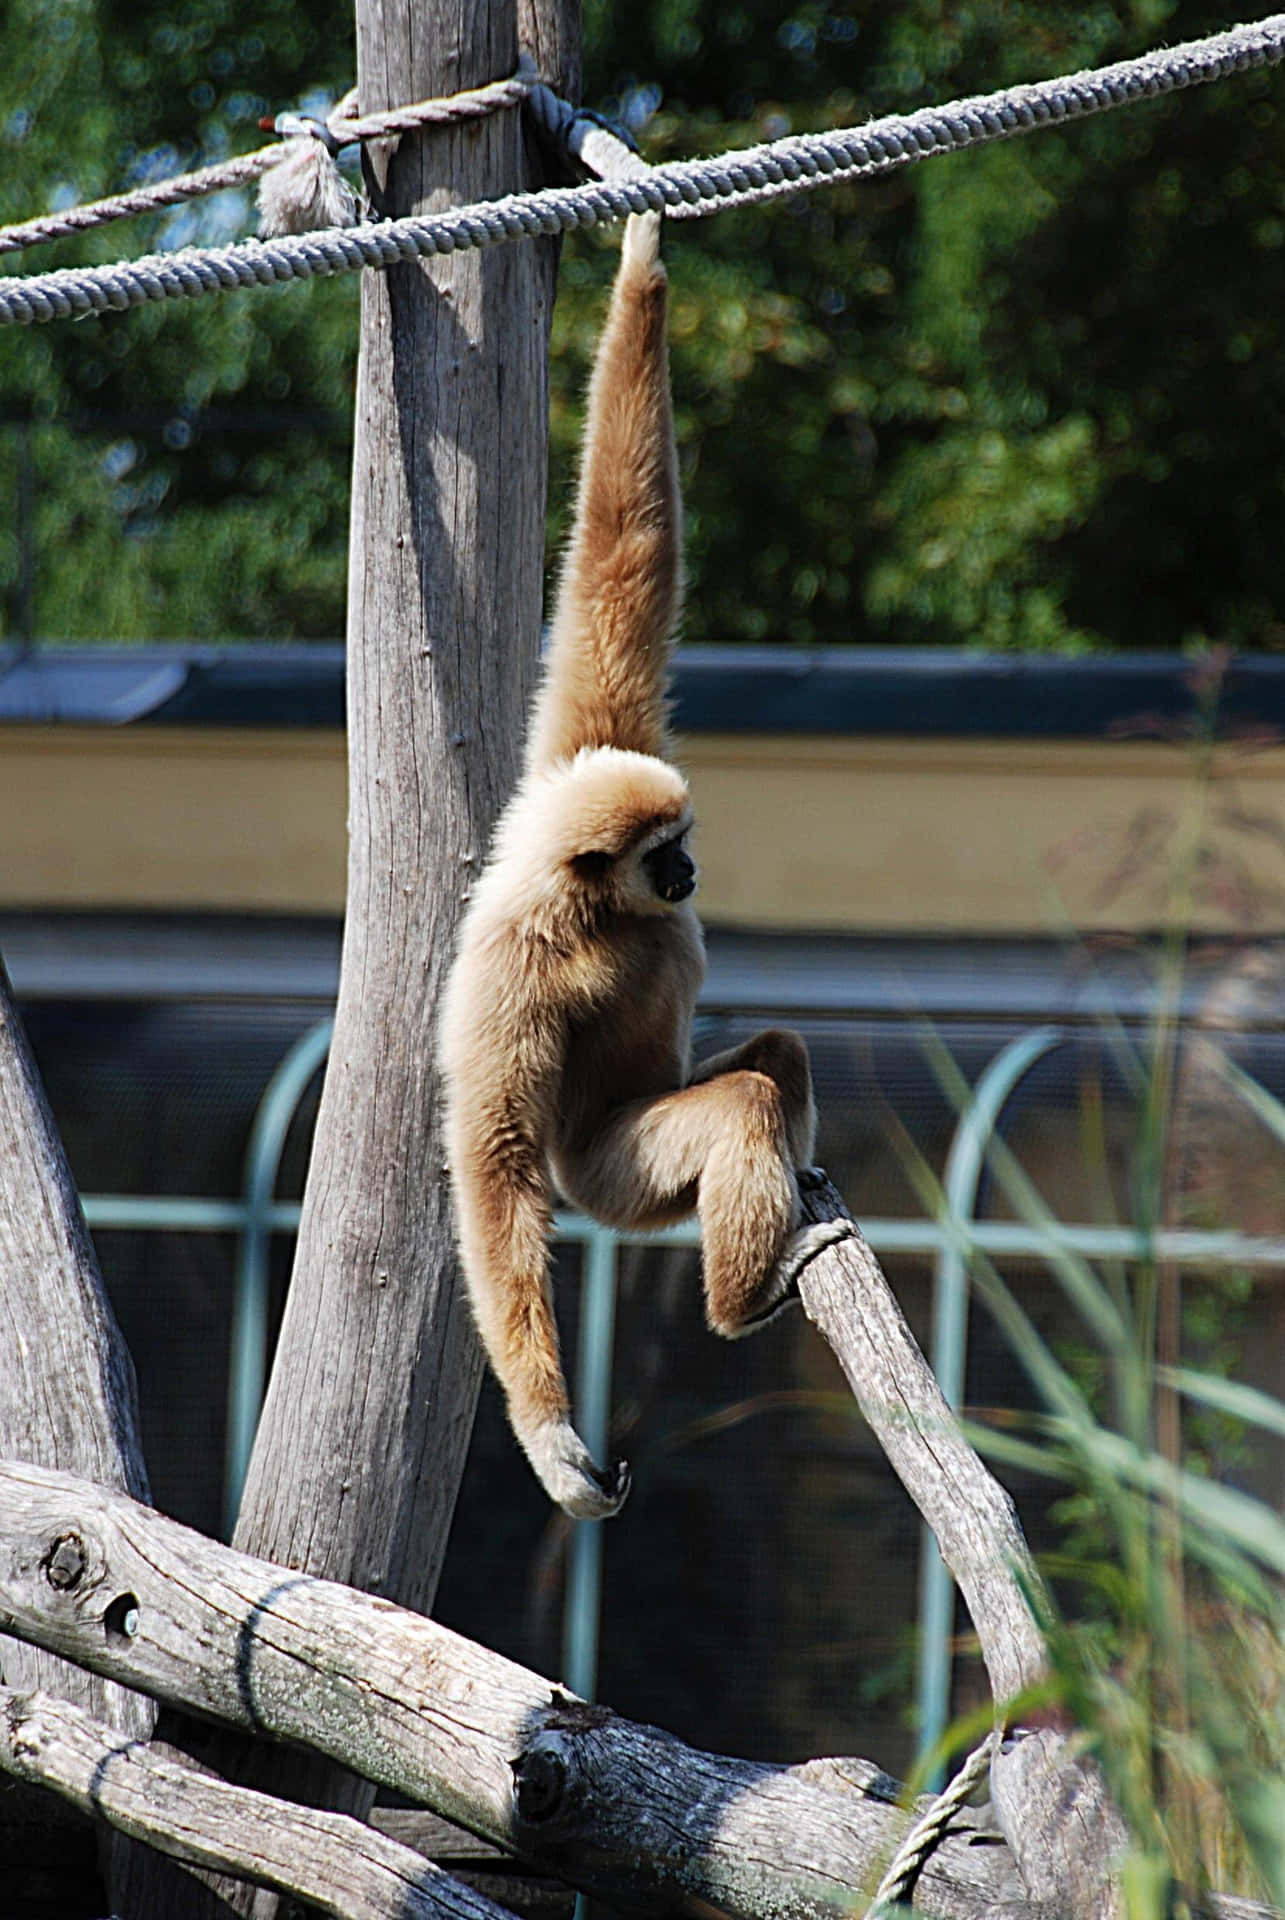 Brighten up your device with a colorful Android Gibbon wallpaper!